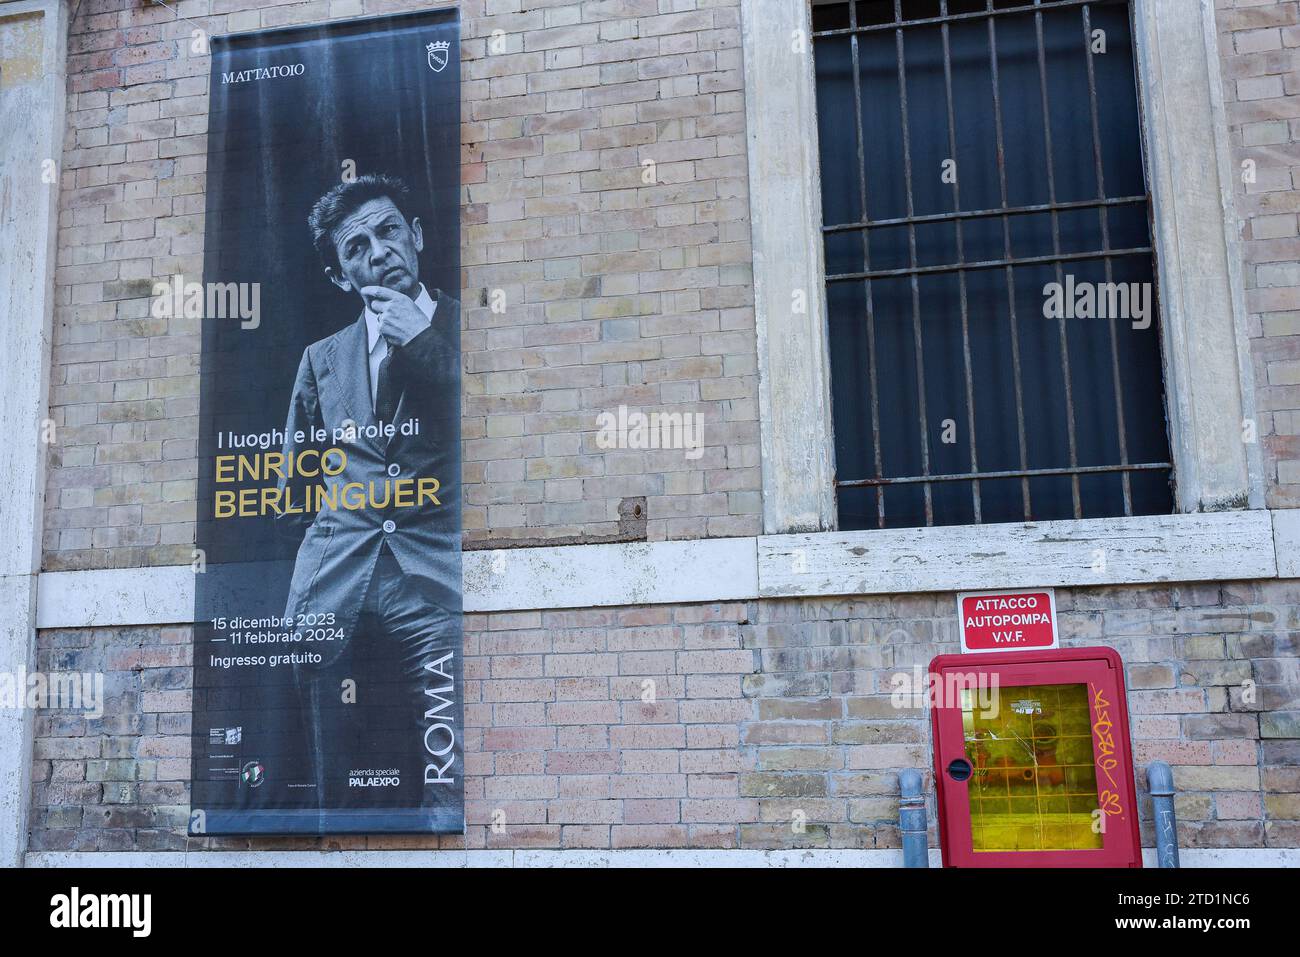 External view of the exhibition 'The places and words of Enrico Berlinguer', at the Mattatoio. The exhibition is dedicated to the figure of Enrico Berlinguer, one of the protagonists of Italian political history of the twentieth century and secretary of the Italian Communist Party from 1972 to 1984, for the centenary of his birth. Stock Photo